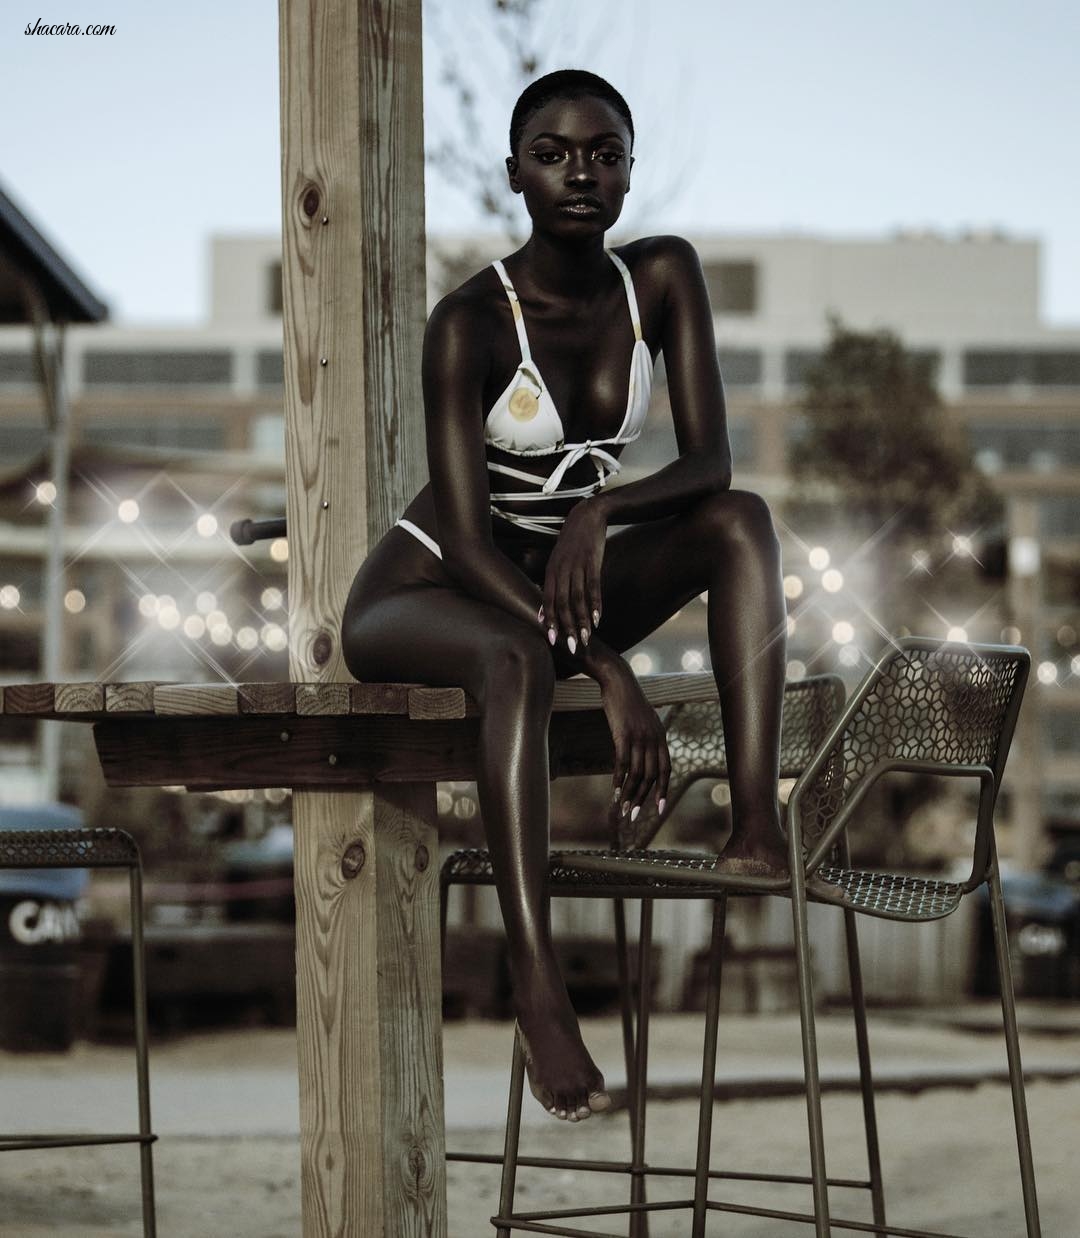 Once You Gaze At Her You Won’t Be Able To Take Your Eyes Off; Meet Senegalese Beauty Soukeyna